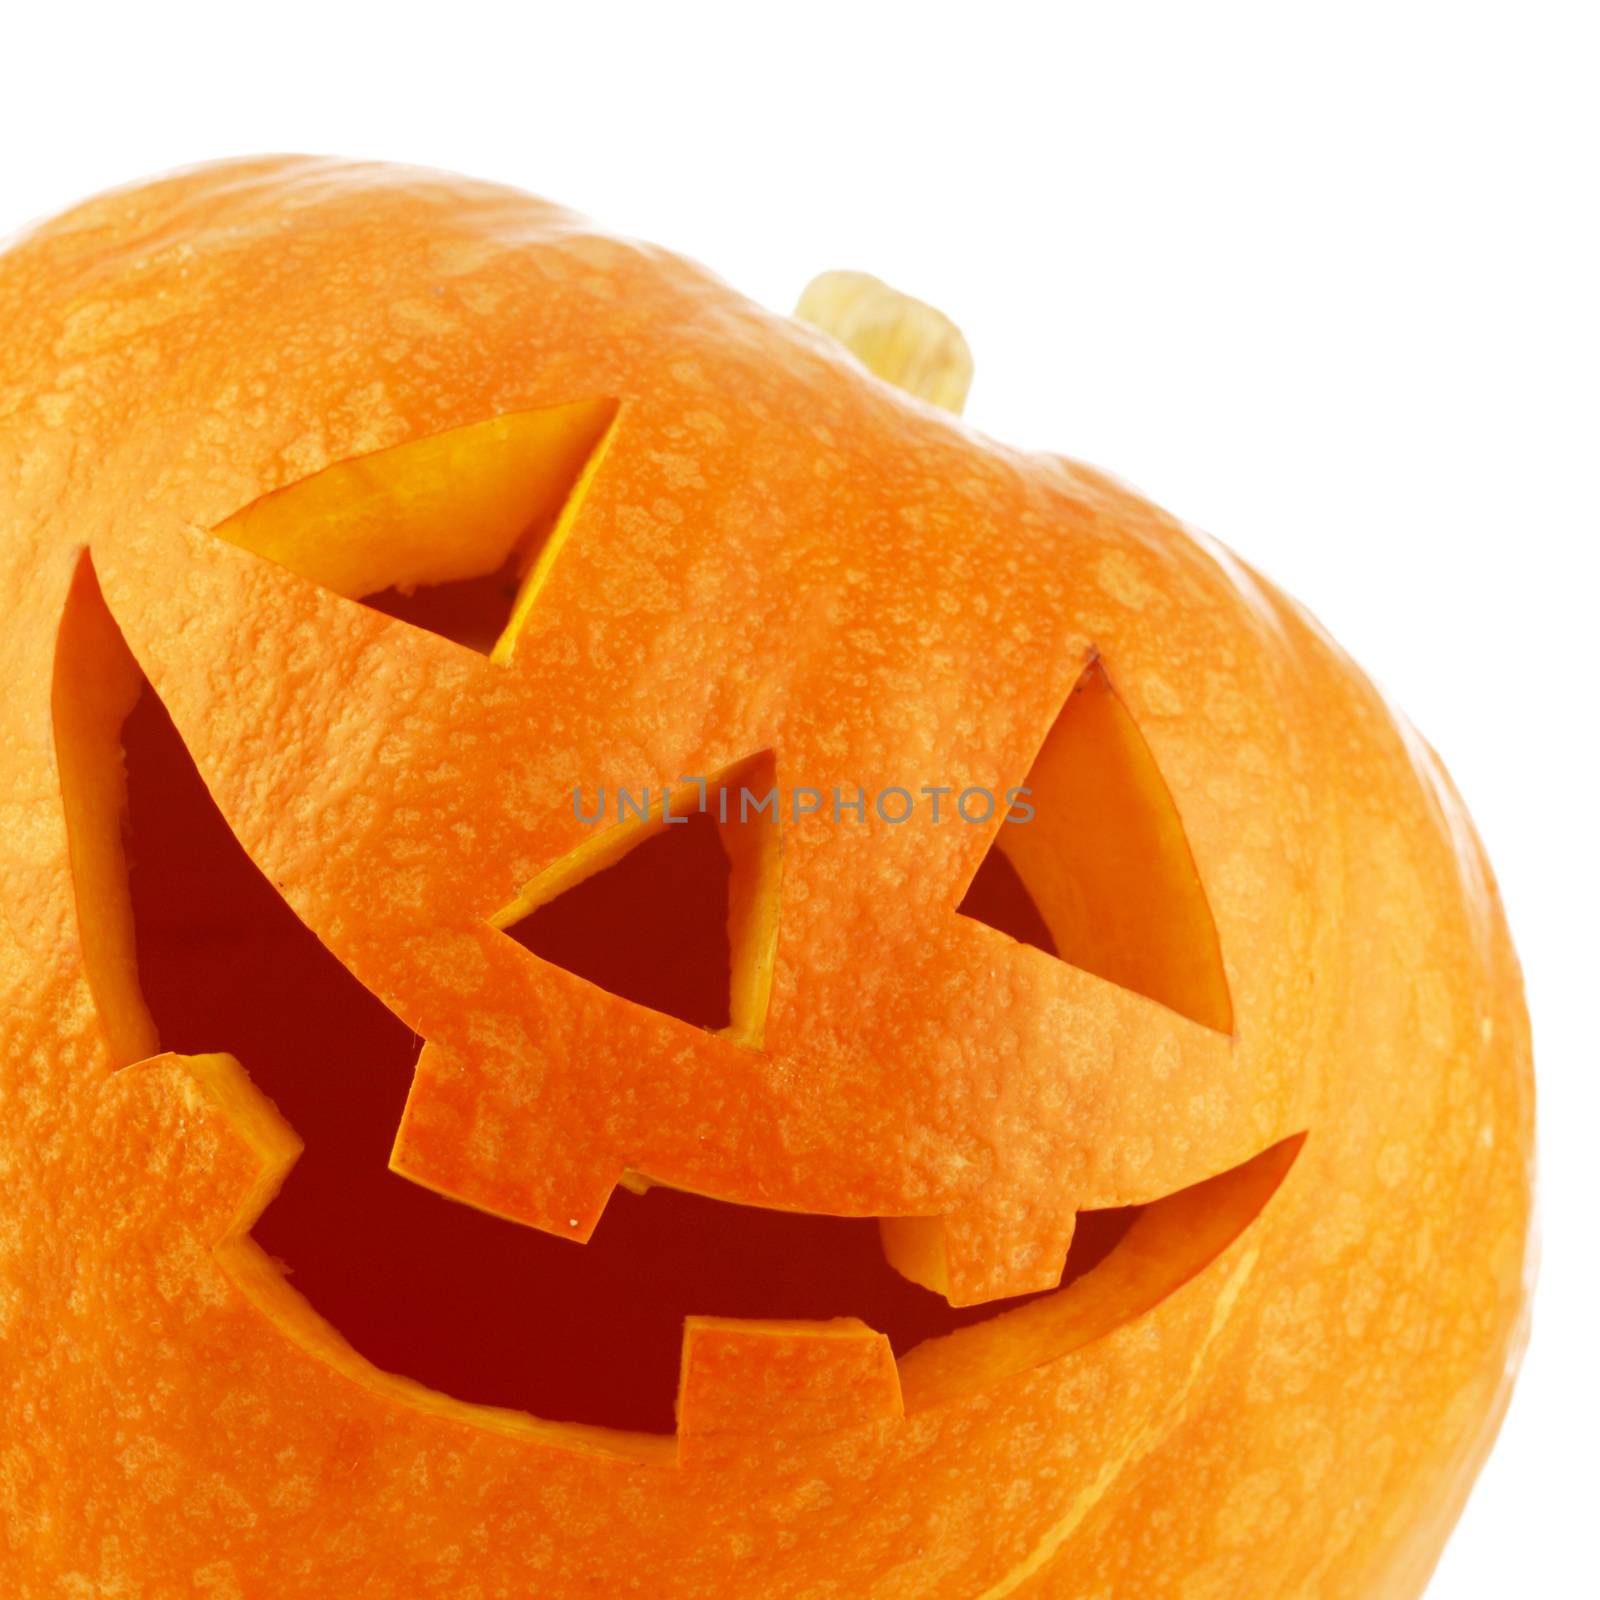 Funny Halloween pumpkin isolated on white background